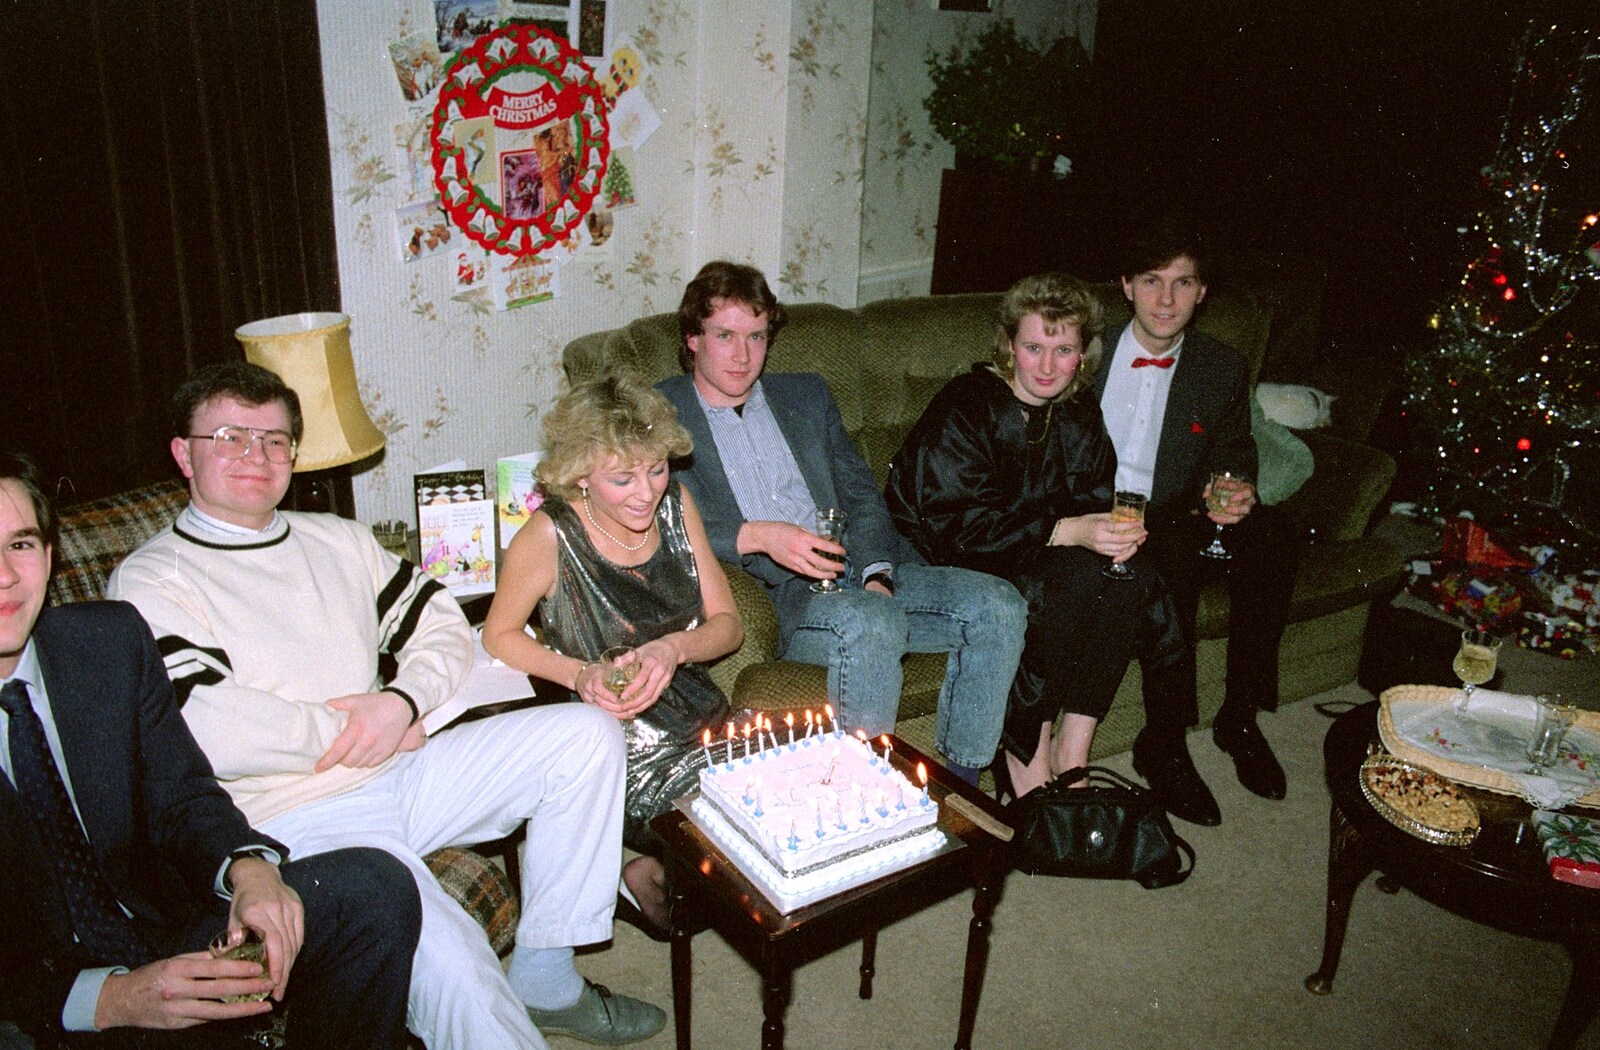 Hamish's cake is on fire from Hamish's 21st and Christmas, New Milton and Bransgore - 25th December 1987